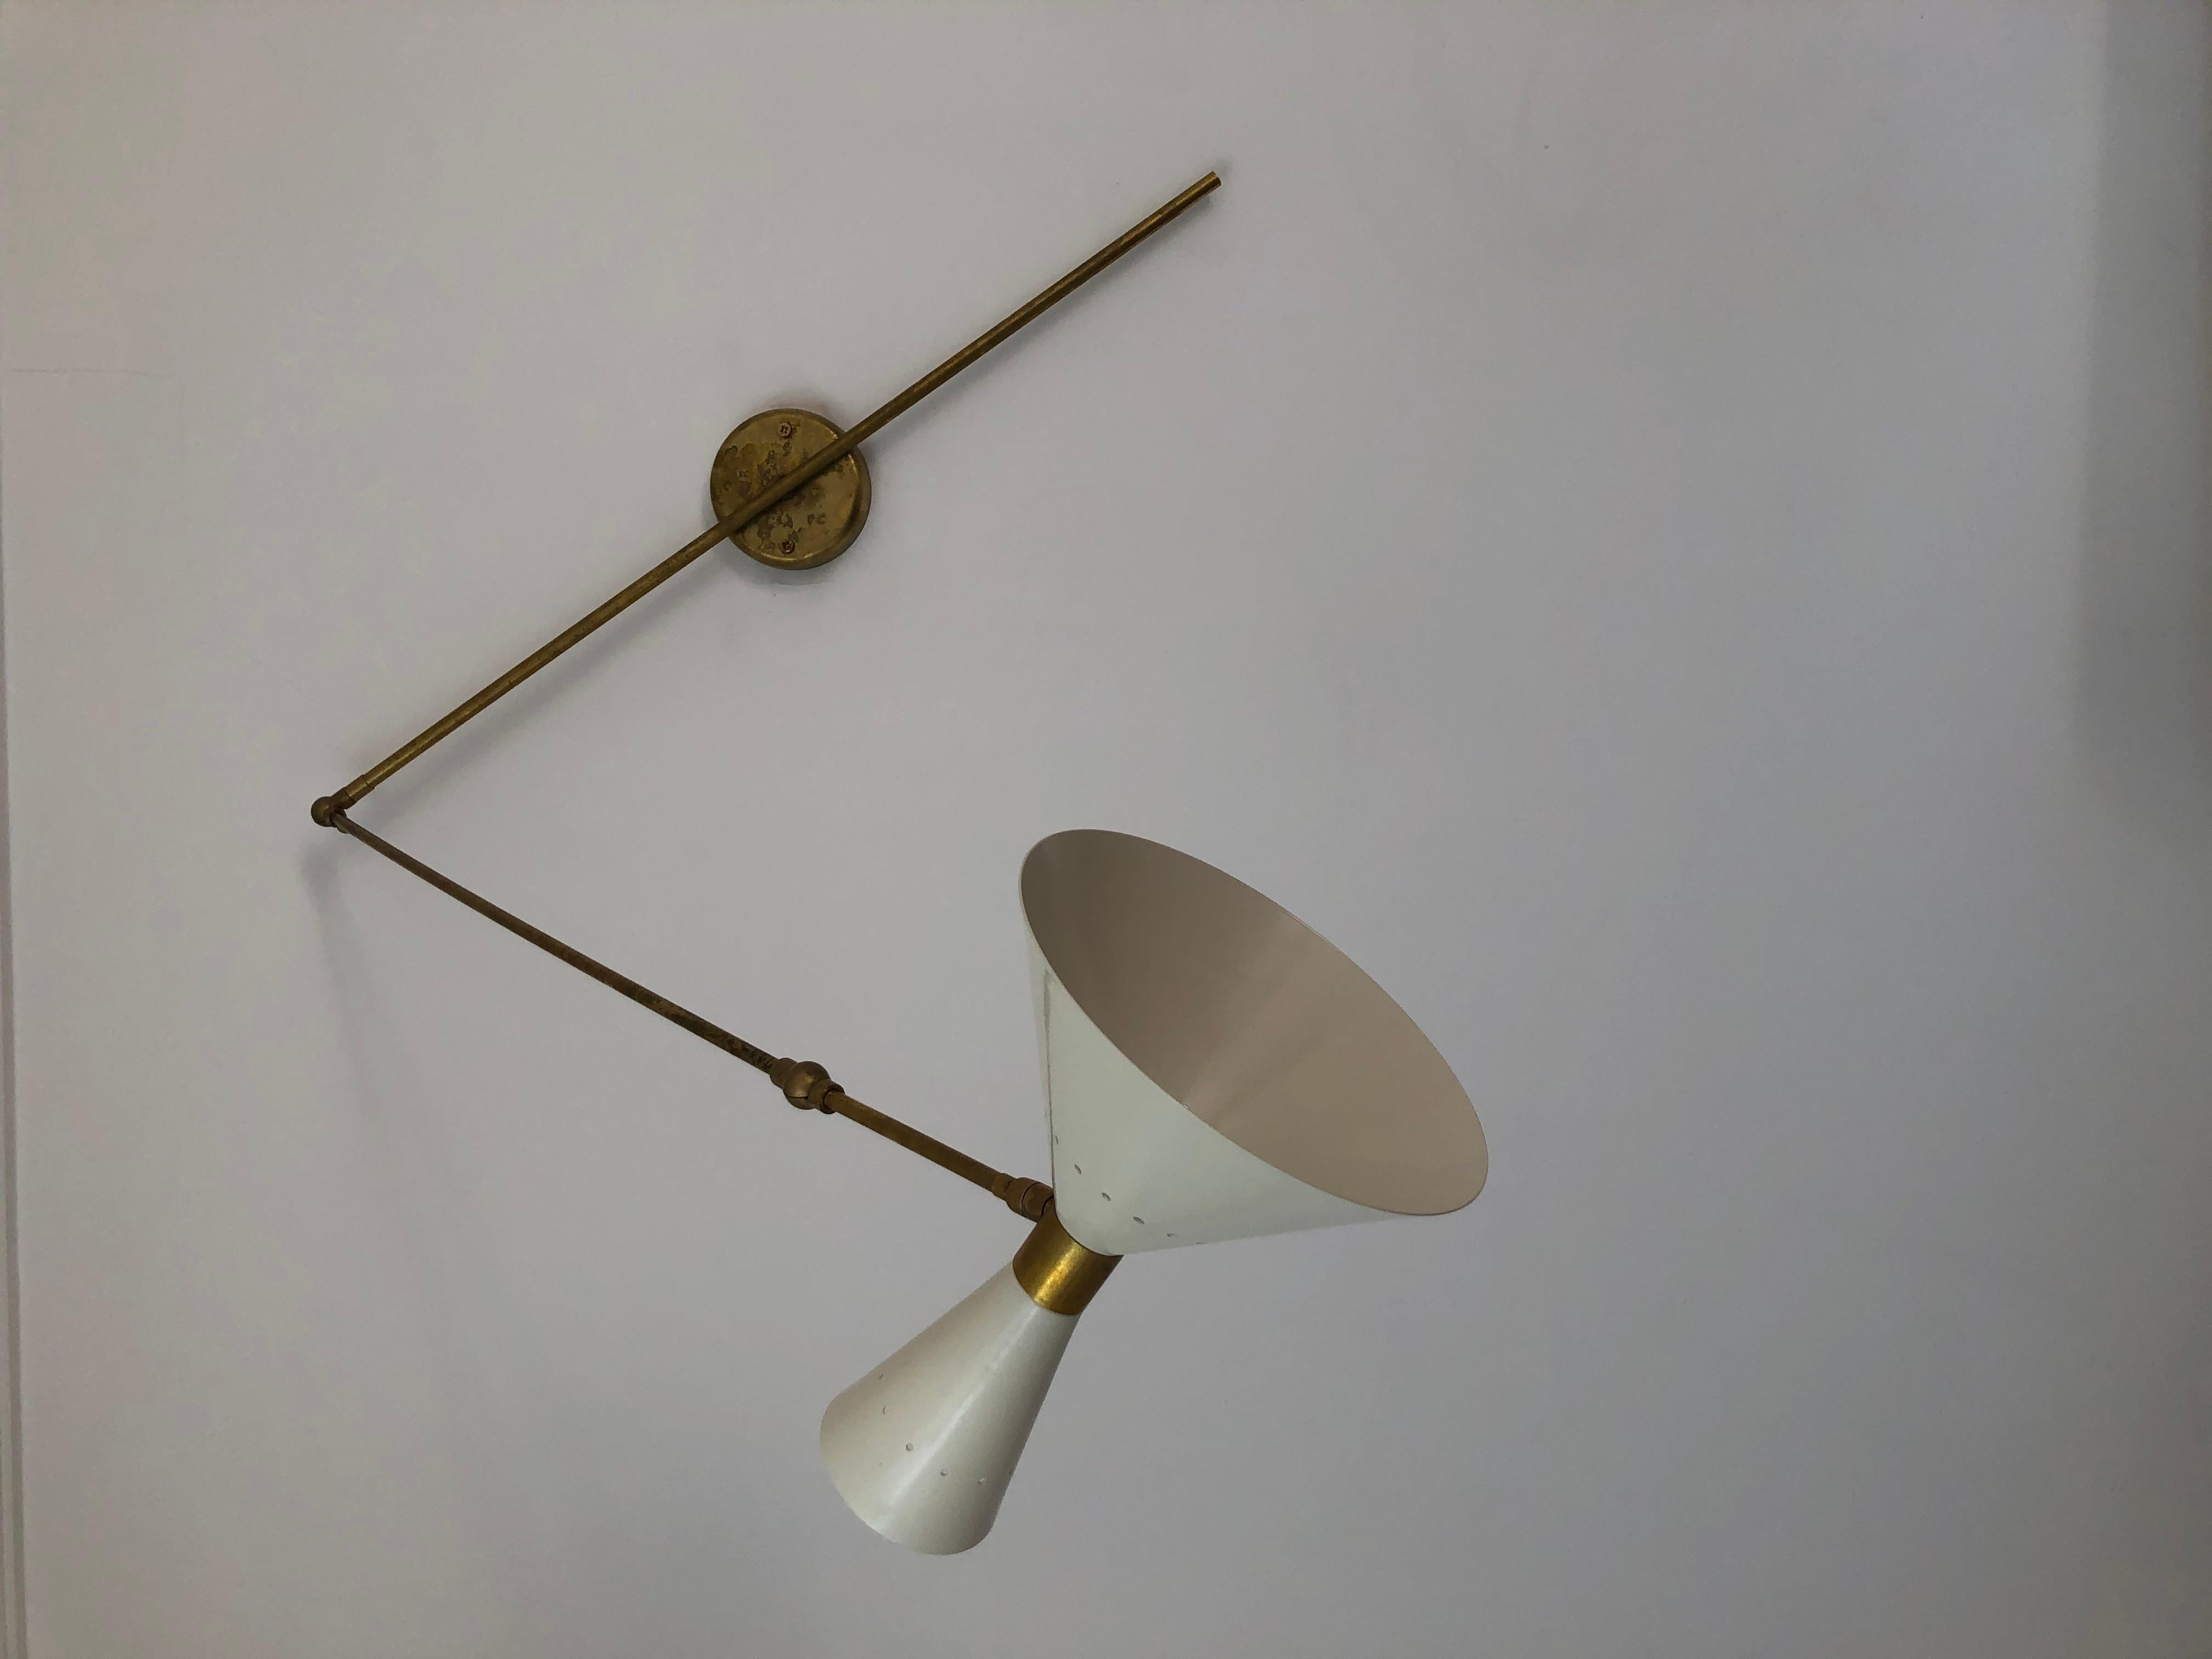 Adjustable Wall Lamp Beige Cone Stilnovo Style -Design-

Materials: Brass, Beige Metal

Conditions: Perfect, with working electrical system

Details: Two light points, one at the top and one at the bottom

Measurements: 90 cm x 90 cm x 13 cm